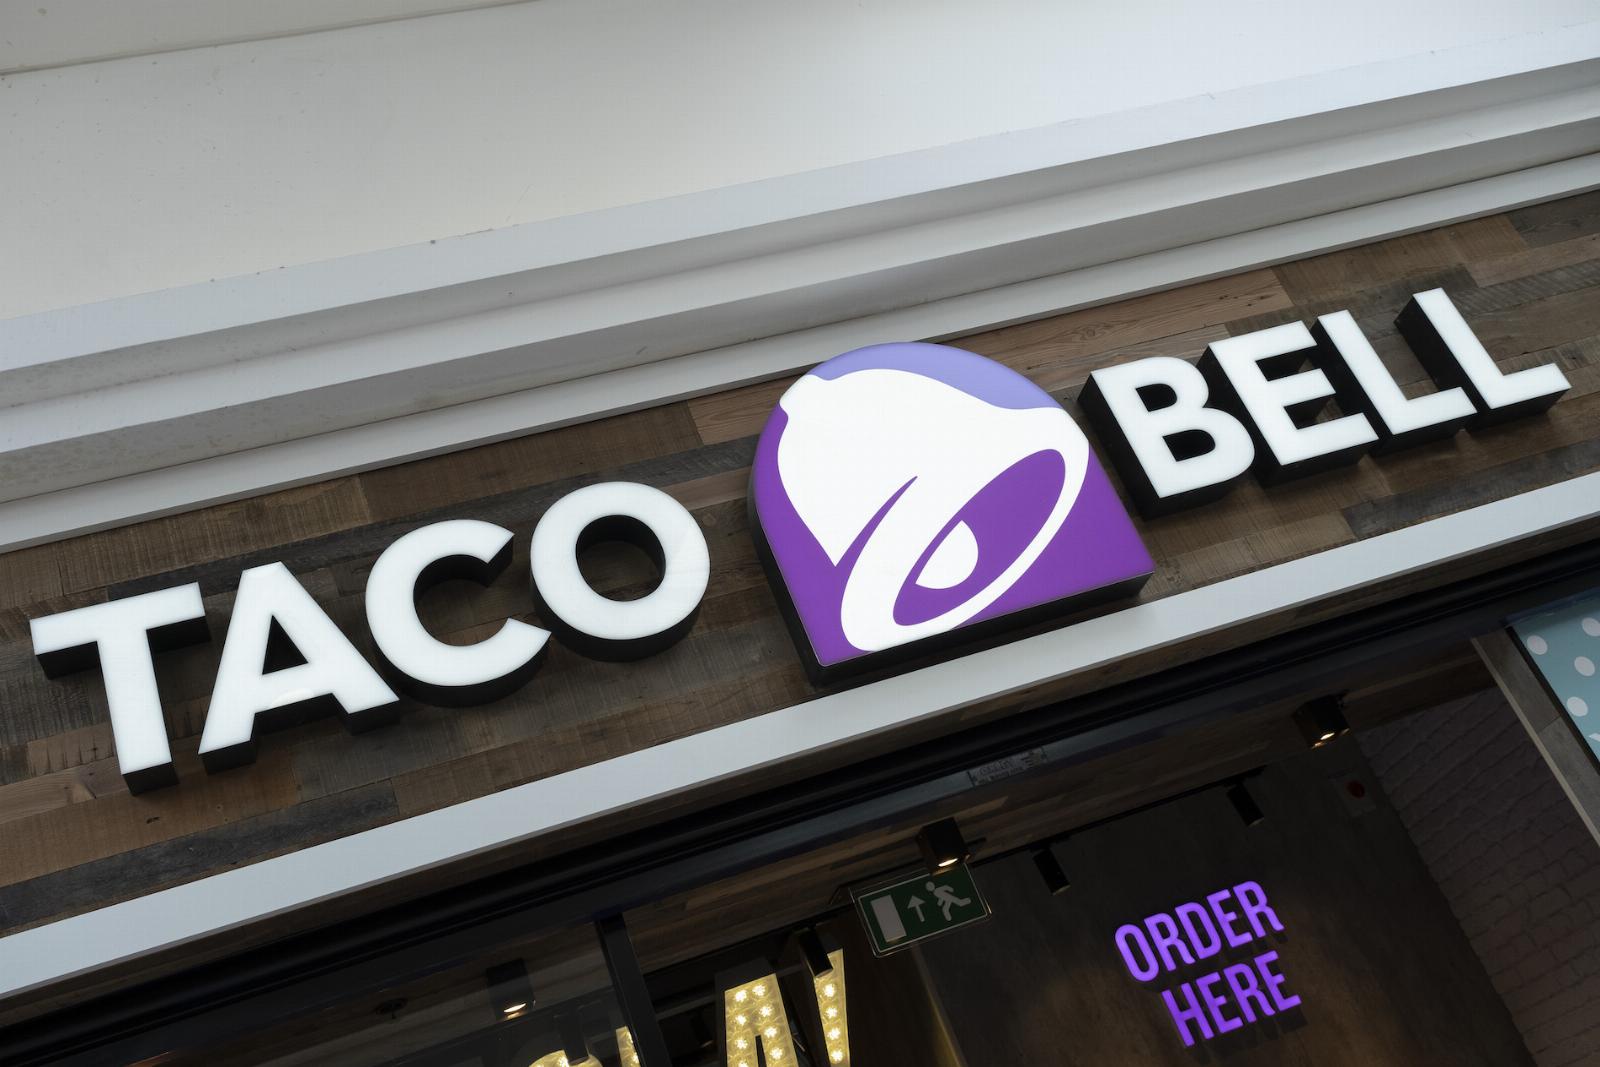 Taco Bell, KFC owner says data stolen during ransomware attack